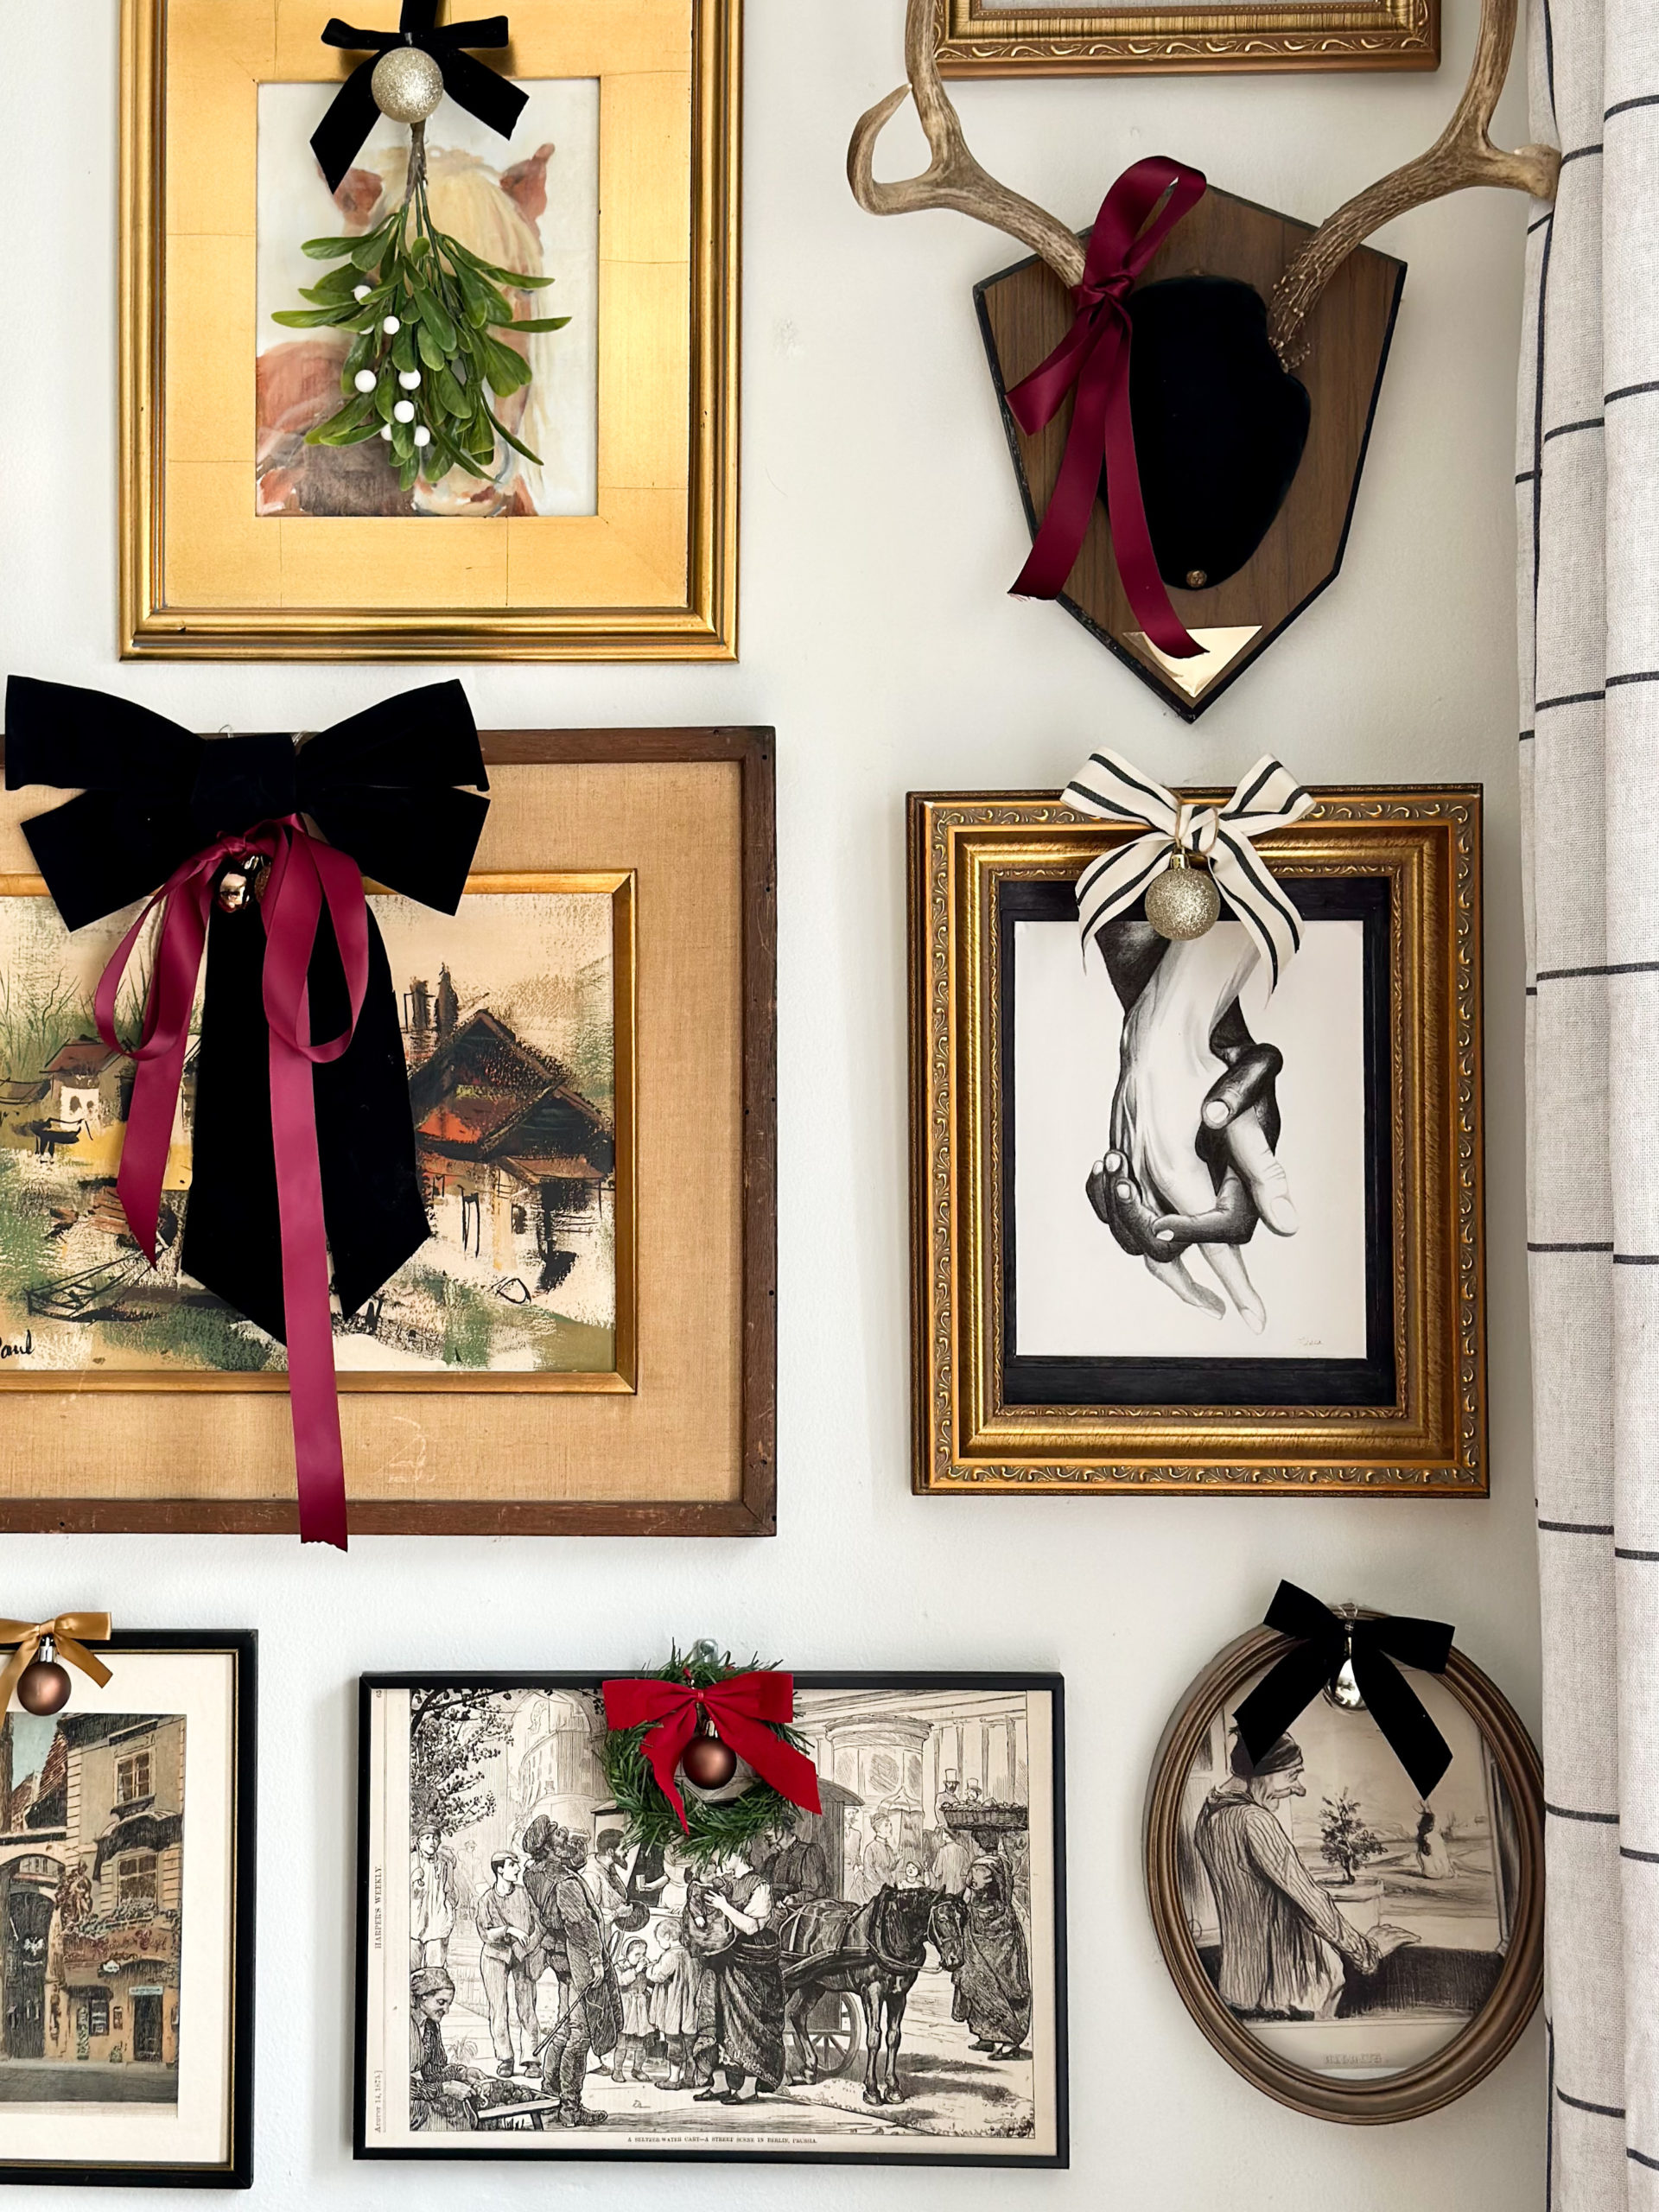 easy and budget friendly ways to decorate for christmas, decorating with bows, decorating art for christmas, christmas decor ideas, bows on frames, decorating art for christmas, christmas diy, framing wrapping paper, decorating gallery wall for christmas, bows on art, wreath on art